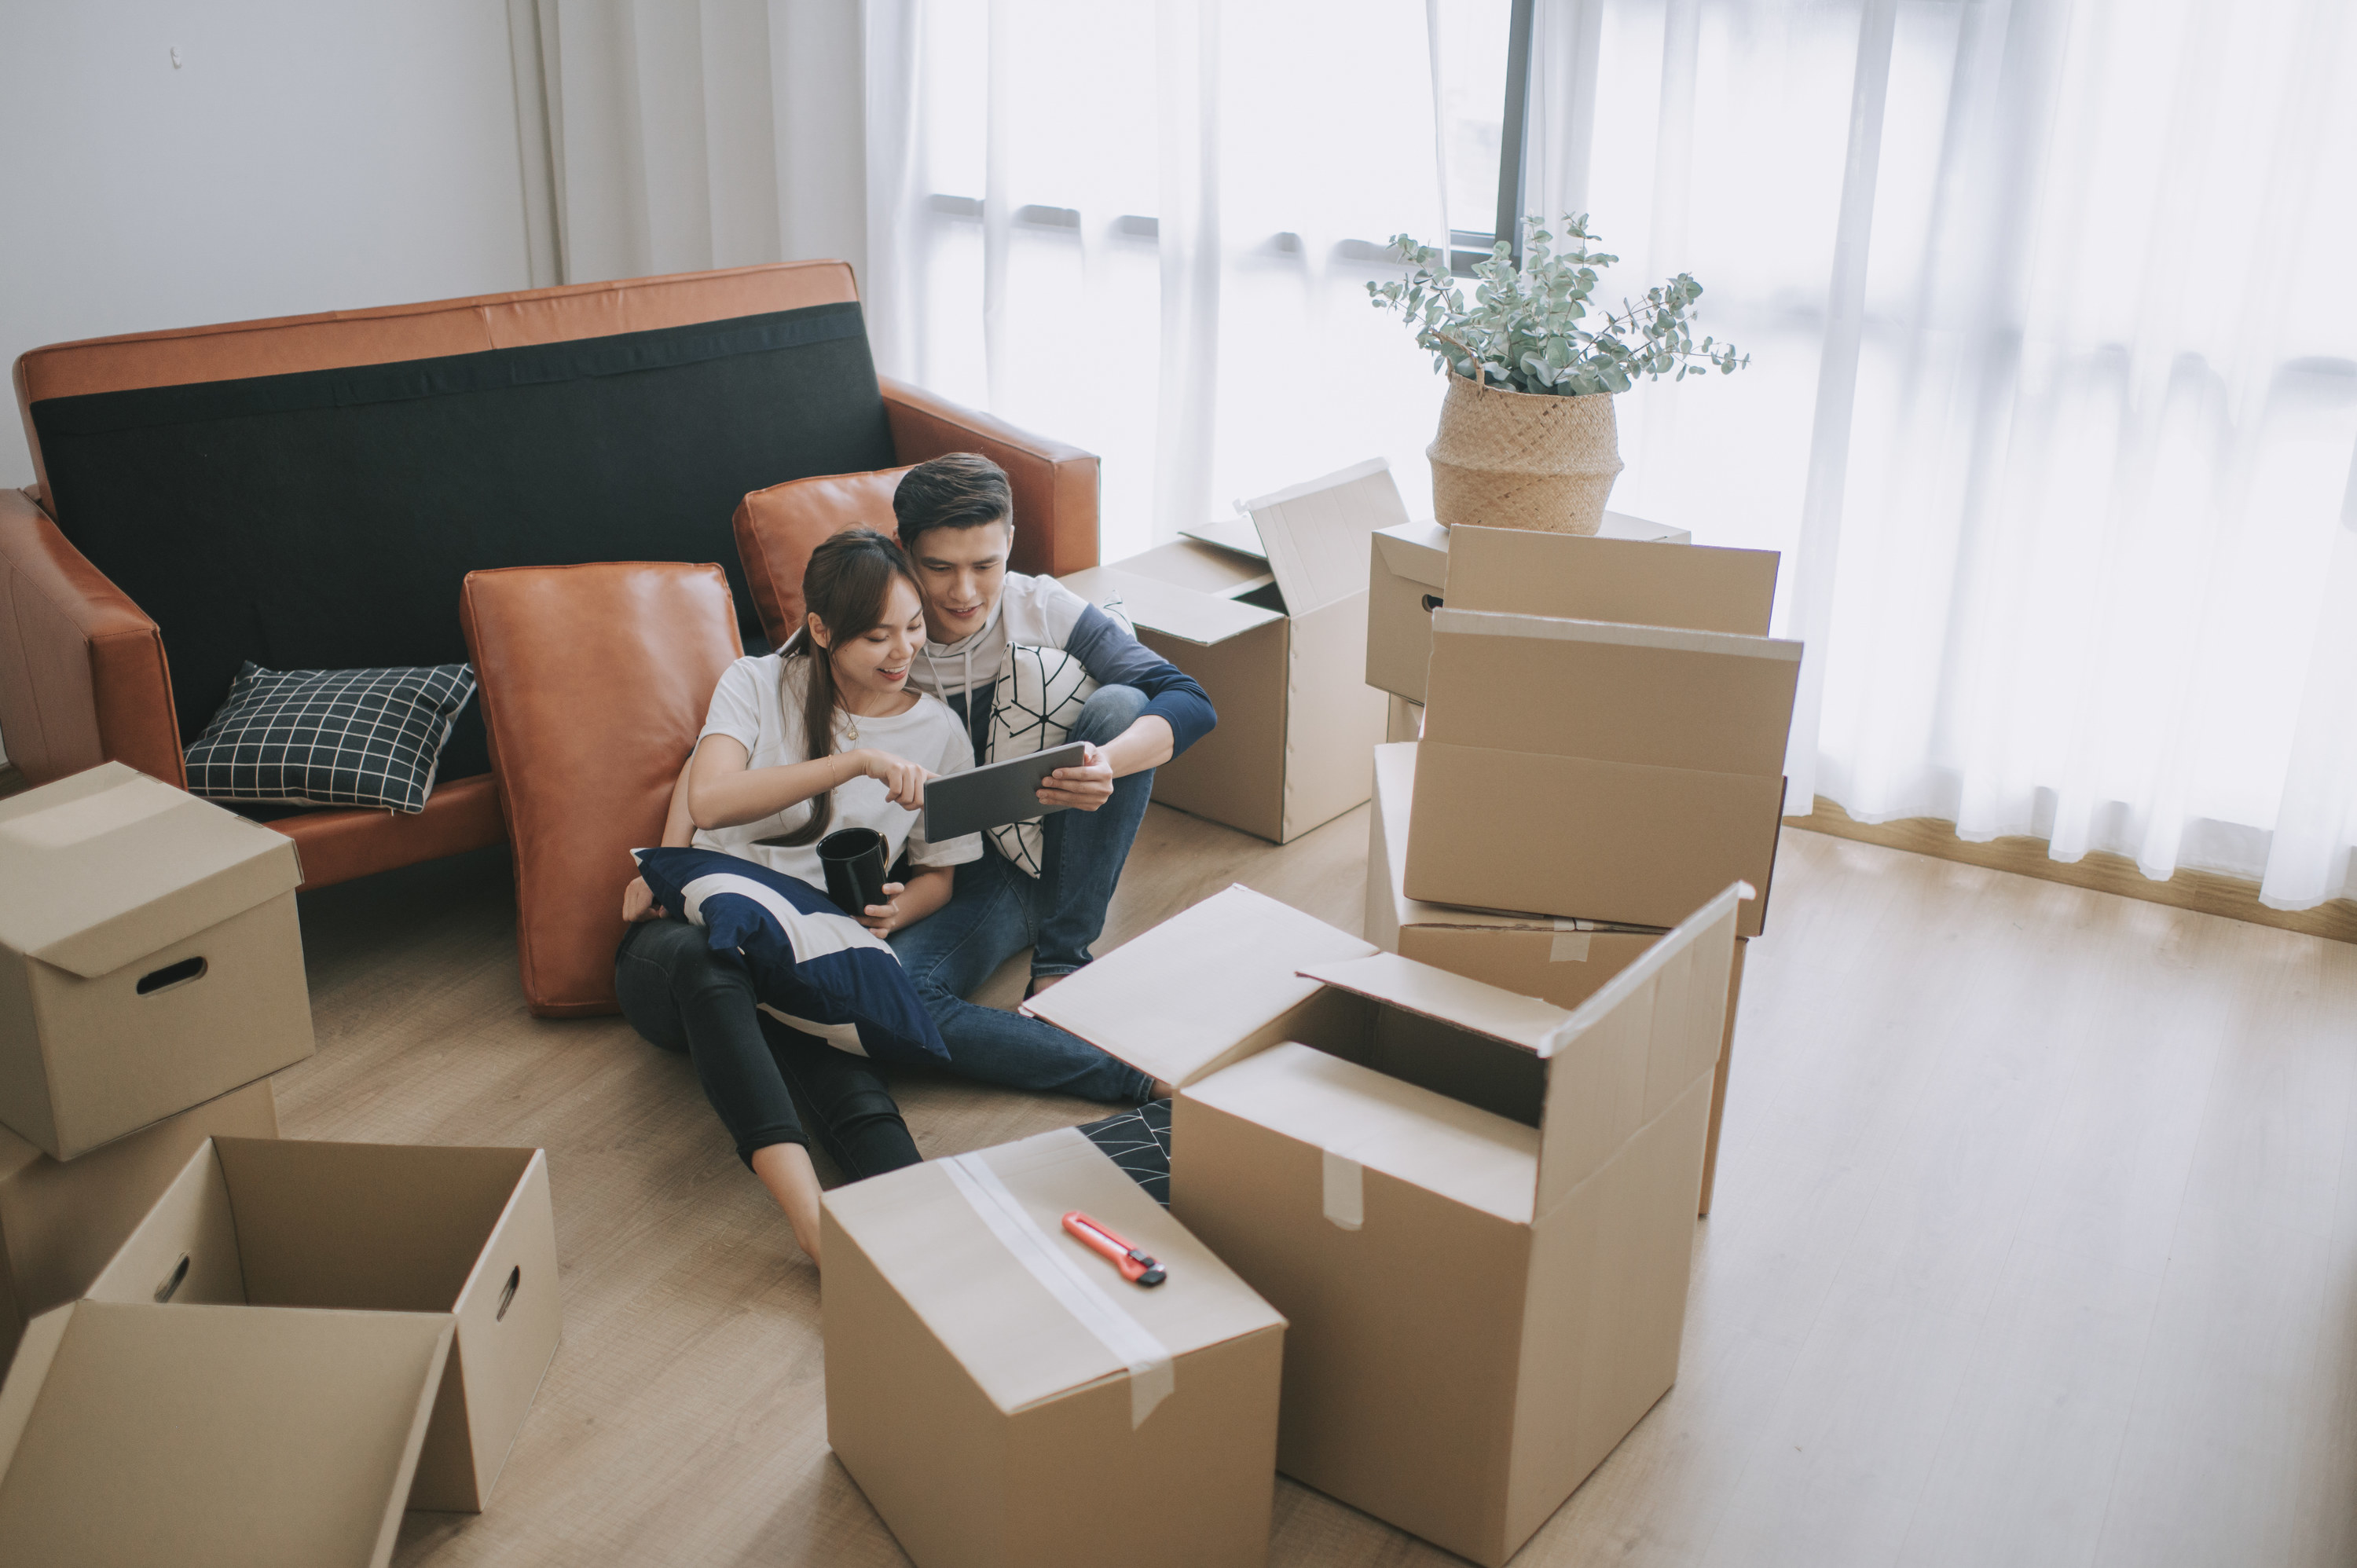 Couple surrounded by boxes in their new living room